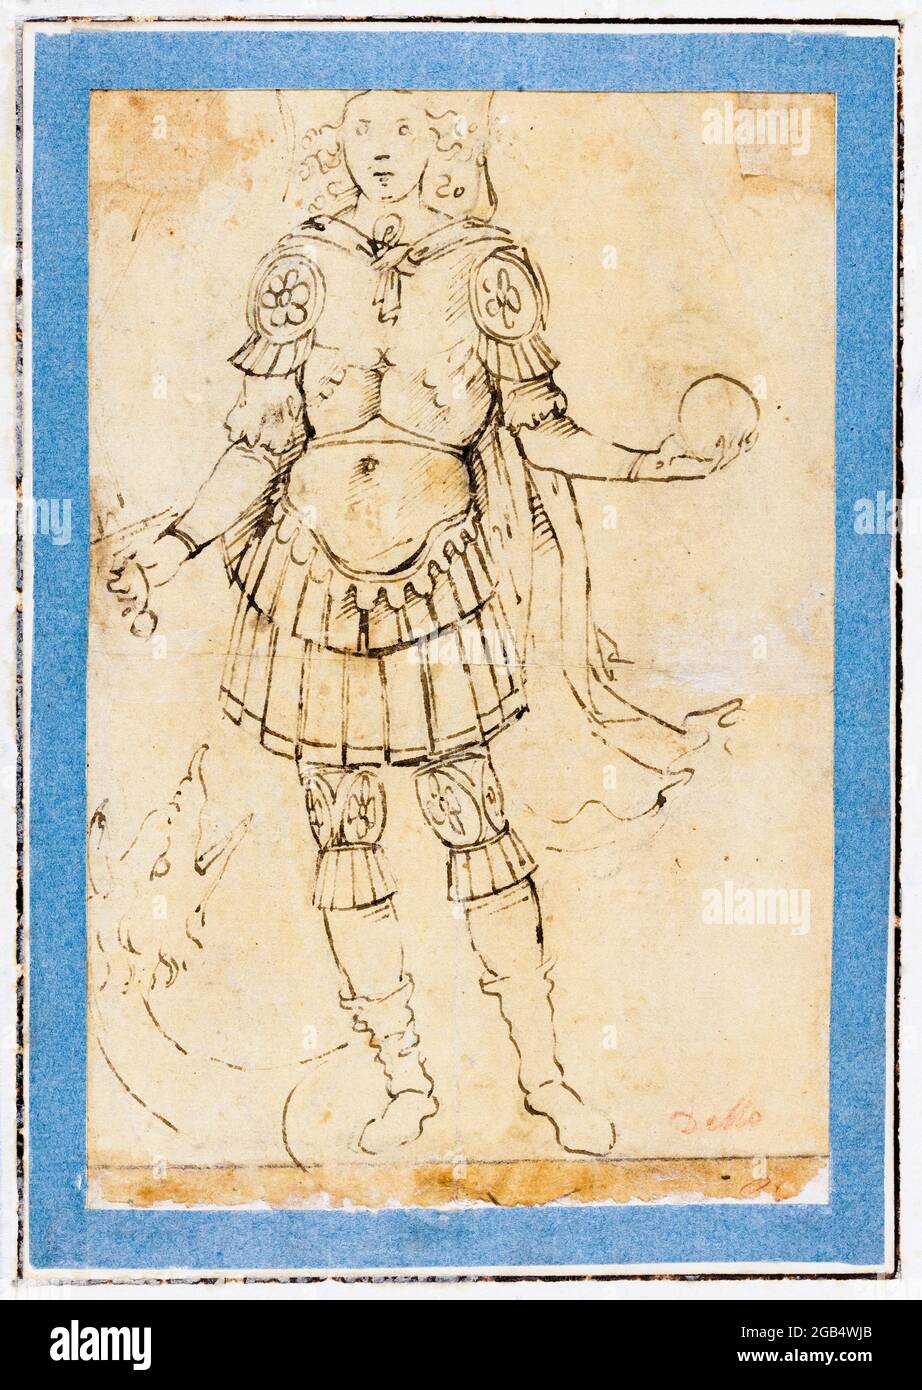 Giotto di Bondone, Untitled sketch, drawing, before 1337 Stock Photo